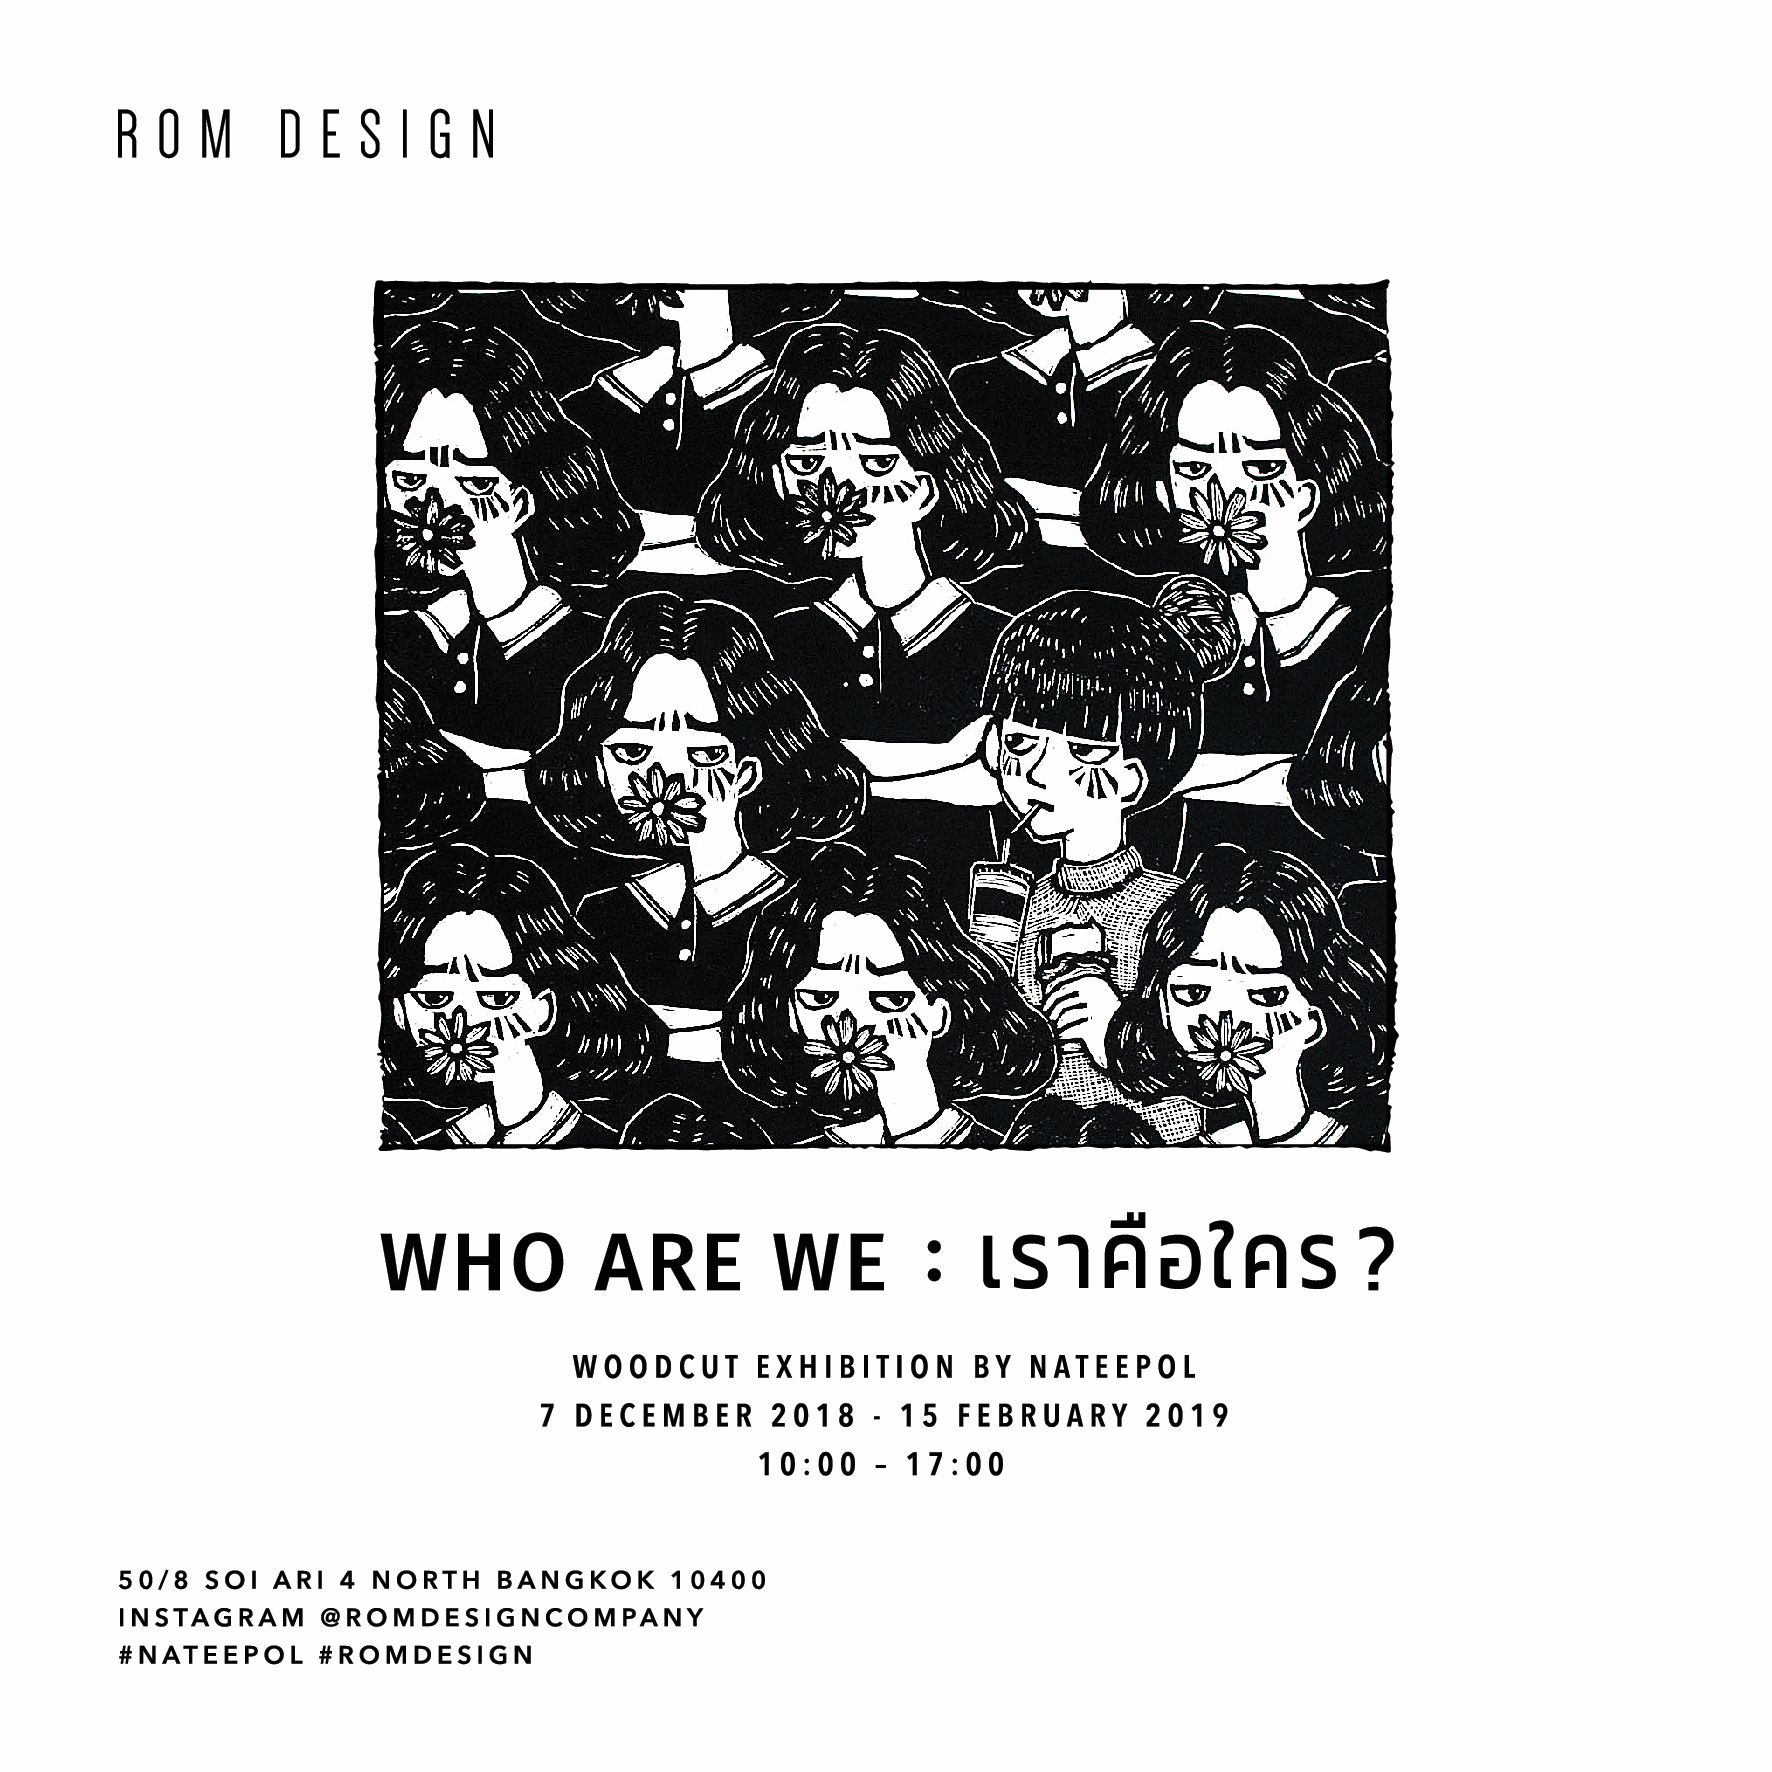 WHO ARE WE : เราคือใคร - Woodcut Exhibition by Nateepol